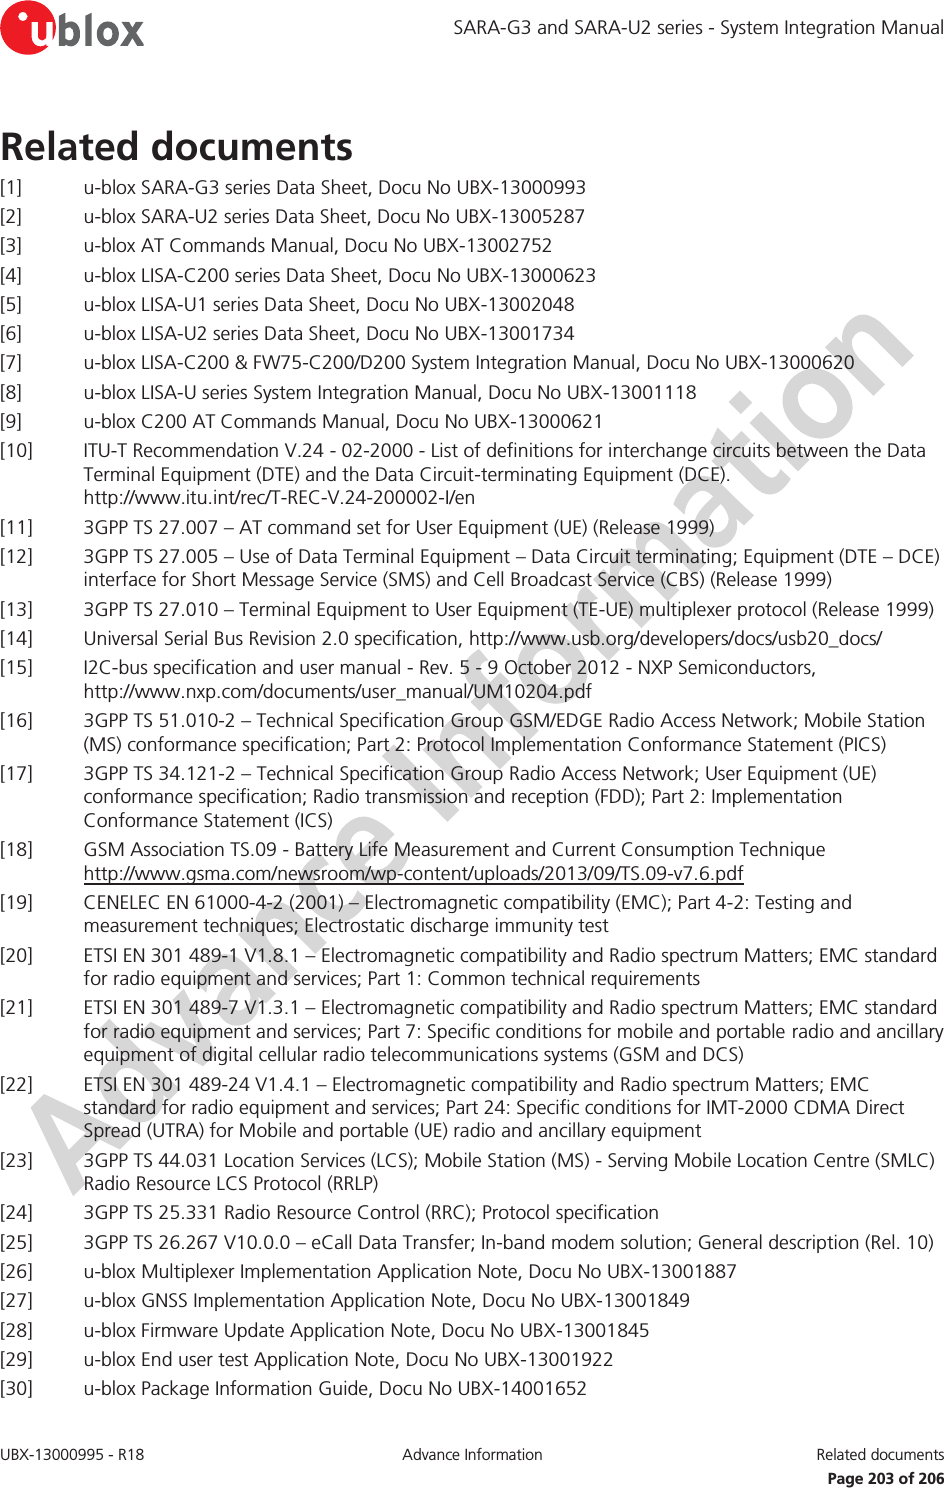 SARA-G3 and SARA-U2 series - System Integration Manual UBX-13000995 - R18  Advance Information  Related documents    Page 203 of 206 Related documents [1] u-blox SARA-G3 series Data Sheet, Docu No UBX-13000993 [2] u-blox SARA-U2 series Data Sheet, Docu No UBX-13005287 [3] u-blox AT Commands Manual, Docu No UBX-13002752 [4] u-blox LISA-C200 series Data Sheet, Docu No UBX-13000623 [5] u-blox LISA-U1 series Data Sheet, Docu No UBX-13002048 [6] u-blox LISA-U2 series Data Sheet, Docu No UBX-13001734 [7] u-blox LISA-C200 &amp; FW75-C200/D200 System Integration Manual, Docu No UBX-13000620 [8] u-blox LISA-U series System Integration Manual, Docu No UBX-13001118 [9] u-blox C200 AT Commands Manual, Docu No UBX-13000621 [10] ITU-T Recommendation V.24 - 02-2000 - List of definitions for interchange circuits between the Data Terminal Equipment (DTE) and the Data Circuit-terminating Equipment (DCE).  http://www.itu.int/rec/T-REC-V.24-200002-I/en [11] 3GPP TS 27.007 – AT command set for User Equipment (UE) (Release 1999) [12] 3GPP TS 27.005 – Use of Data Terminal Equipment – Data Circuit terminating; Equipment (DTE – DCE) interface for Short Message Service (SMS) and Cell Broadcast Service (CBS) (Release 1999) [13] 3GPP TS 27.010 – Terminal Equipment to User Equipment (TE-UE) multiplexer protocol (Release 1999) [14] Universal Serial Bus Revision 2.0 specification, http://www.usb.org/developers/docs/usb20_docs/  [15] I2C-bus specification and user manual - Rev. 5 - 9 October 2012 - NXP Semiconductors, http://www.nxp.com/documents/user_manual/UM10204.pdf  [16] 3GPP TS 51.010-2 – Technical Specification Group GSM/EDGE Radio Access Network; Mobile Station (MS) conformance specification; Part 2: Protocol Implementation Conformance Statement (PICS)  [17] 3GPP TS 34.121-2 – Technical Specification Group Radio Access Network; User Equipment (UE) conformance specification; Radio transmission and reception (FDD); Part 2: Implementation Conformance Statement (ICS) [18] GSM Association TS.09 - Battery Life Measurement and Current Consumption Technique  http://www.gsma.com/newsroom/wp-content/uploads/2013/09/TS.09-v7.6.pdf  [19] CENELEC EN 61000-4-2 (2001) – Electromagnetic compatibility (EMC); Part 4-2: Testing and measurement techniques; Electrostatic discharge immunity test [20] ETSI EN 301 489-1 V1.8.1 – Electromagnetic compatibility and Radio spectrum Matters; EMC standard for radio equipment and services; Part 1: Common technical requirements [21] ETSI EN 301 489-7 V1.3.1 – Electromagnetic compatibility and Radio spectrum Matters; EMC standard for radio equipment and services; Part 7: Specific conditions for mobile and portable radio and ancillary equipment of digital cellular radio telecommunications systems (GSM and DCS) [22] ETSI EN 301 489-24 V1.4.1 – Electromagnetic compatibility and Radio spectrum Matters; EMC standard for radio equipment and services; Part 24: Specific conditions for IMT-2000 CDMA Direct Spread (UTRA) for Mobile and portable (UE) radio and ancillary equipment [23] 3GPP TS 44.031 Location Services (LCS); Mobile Station (MS) - Serving Mobile Location Centre (SMLC) Radio Resource LCS Protocol (RRLP) [24] 3GPP TS 25.331 Radio Resource Control (RRC); Protocol specification [25] 3GPP TS 26.267 V10.0.0 – eCall Data Transfer; In-band modem solution; General description (Rel. 10) [26] u-blox Multiplexer Implementation Application Note, Docu No UBX-13001887 [27] u-blox GNSS Implementation Application Note, Docu No UBX-13001849 [28] u-blox Firmware Update Application Note, Docu No UBX-13001845 [29] u-blox End user test Application Note, Docu No UBX-13001922 [30] u-blox Package Information Guide, Docu No UBX-14001652 